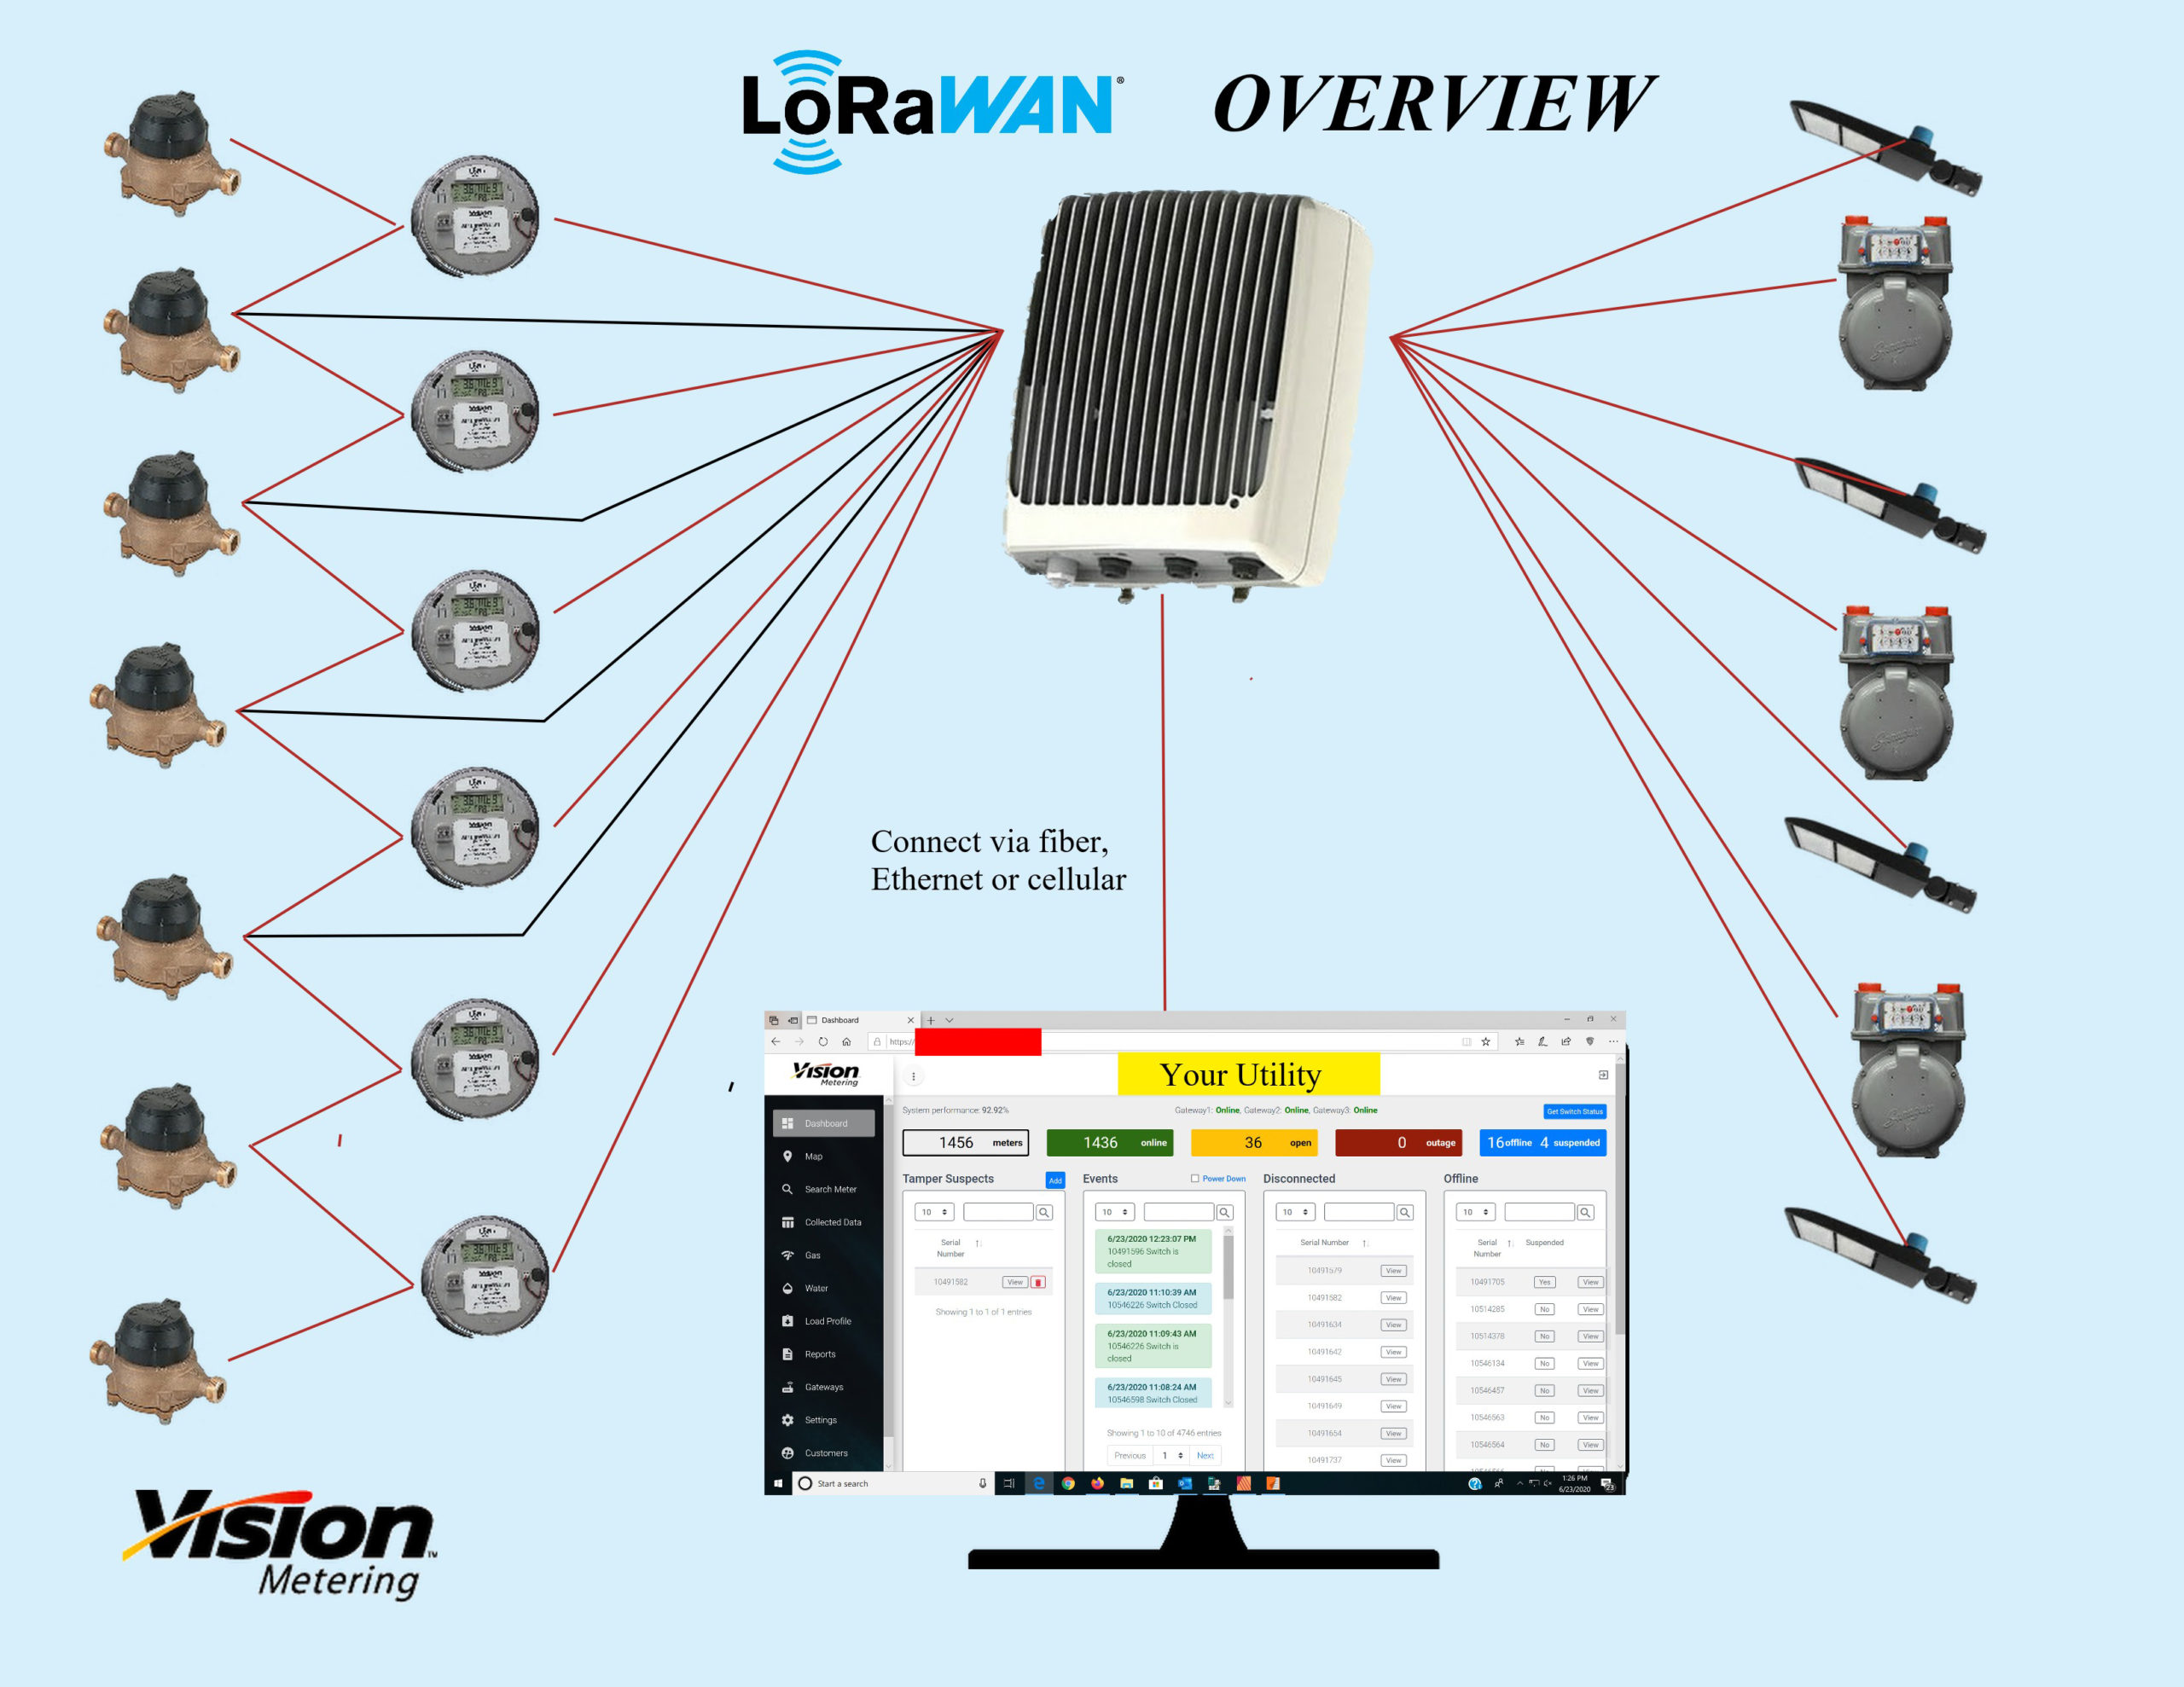 LoRa_Pictoral_Overview_600w_2020_07